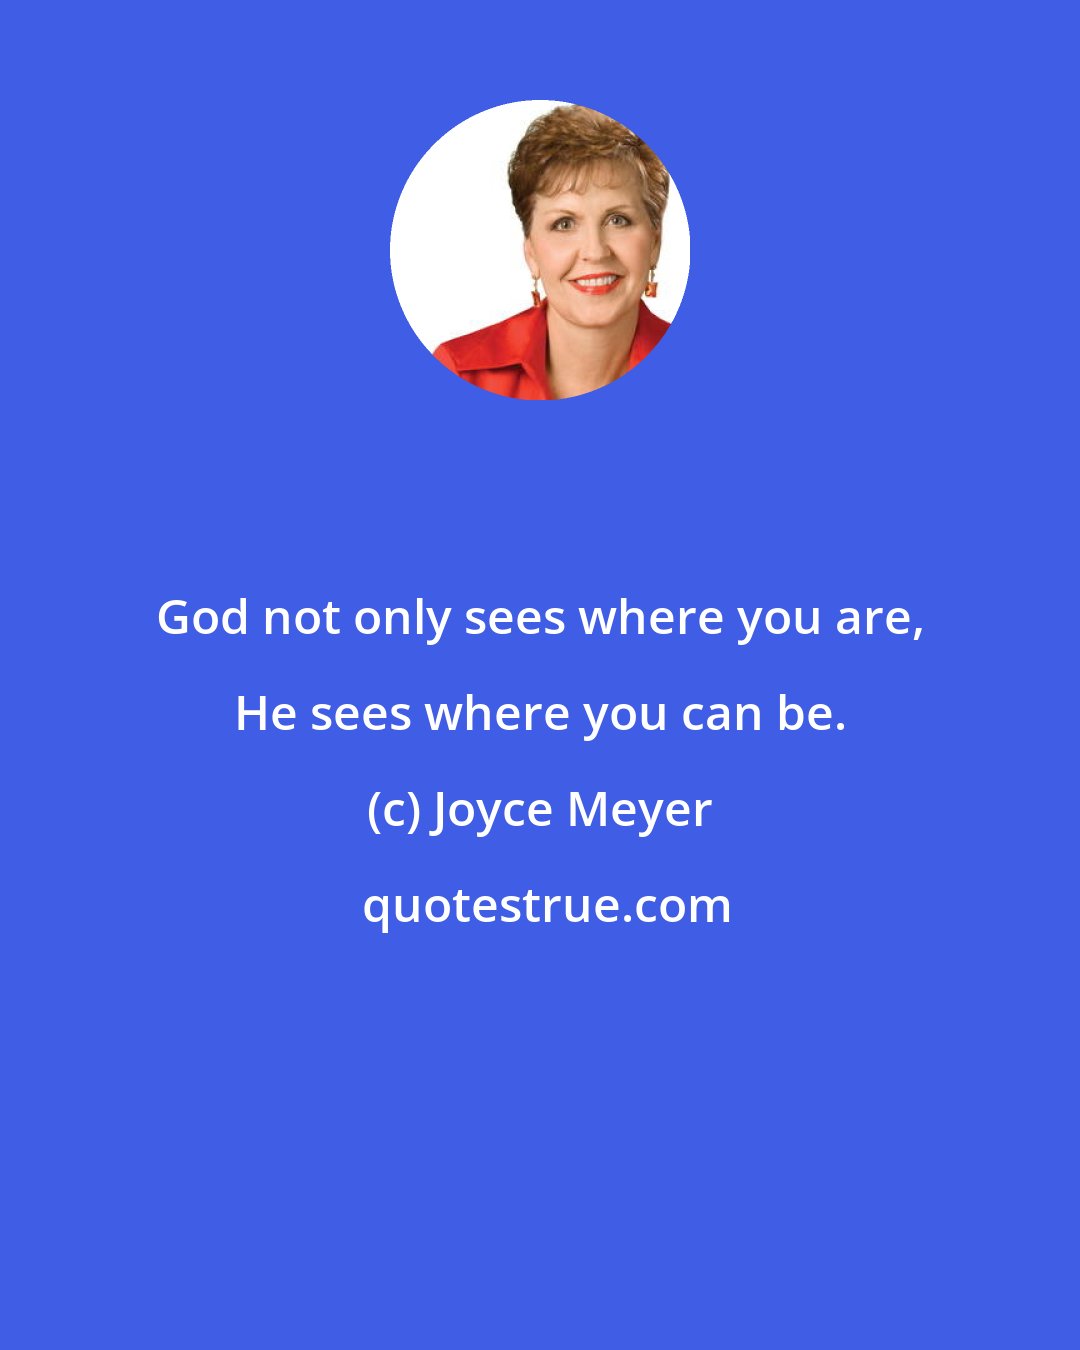 Joyce Meyer: God not only sees where you are, He sees where you can be.